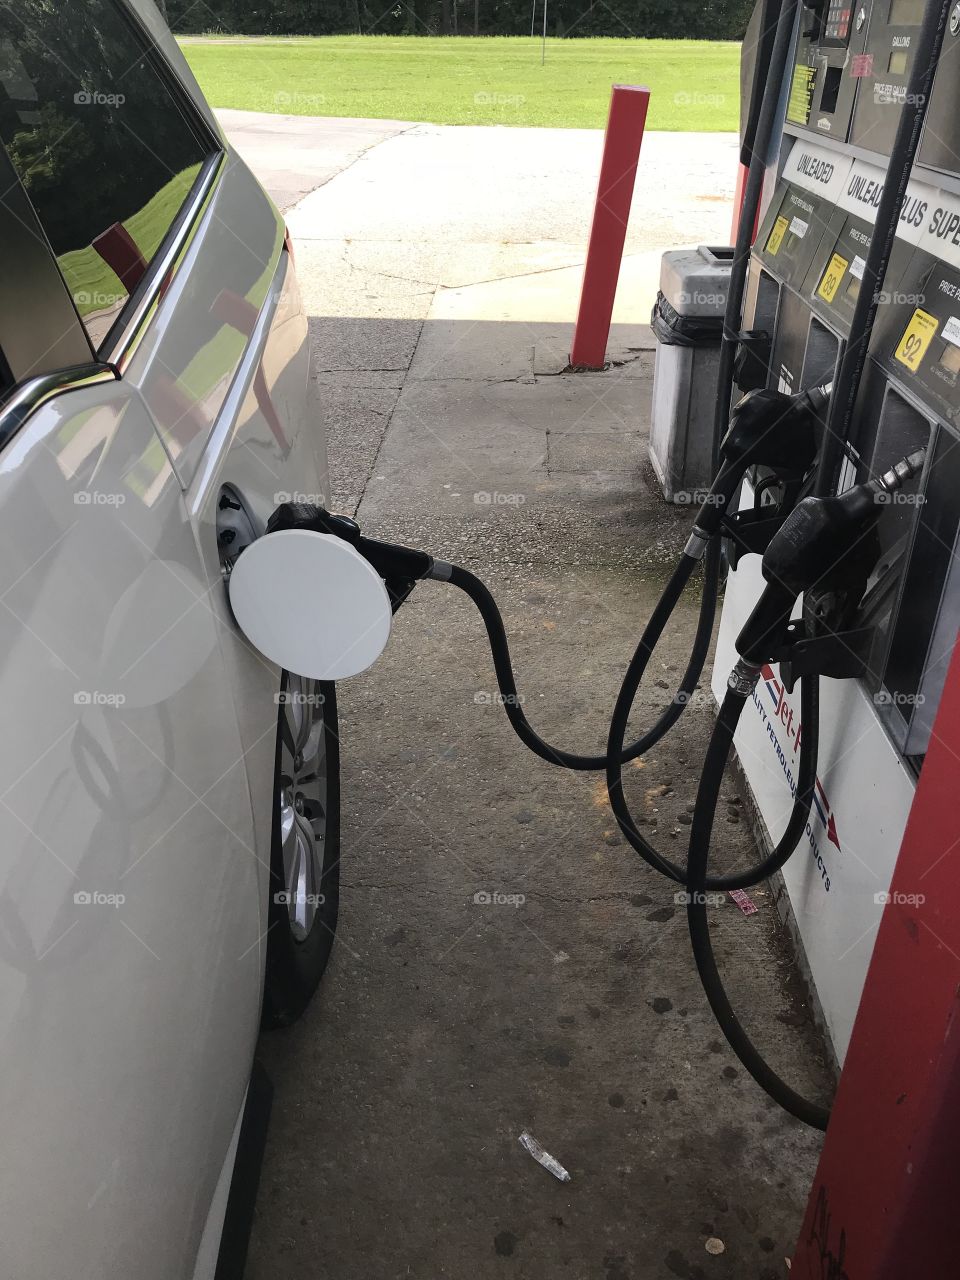 This white vehicle is getting filled up with gas, so we can go on an adventurous road trip. 